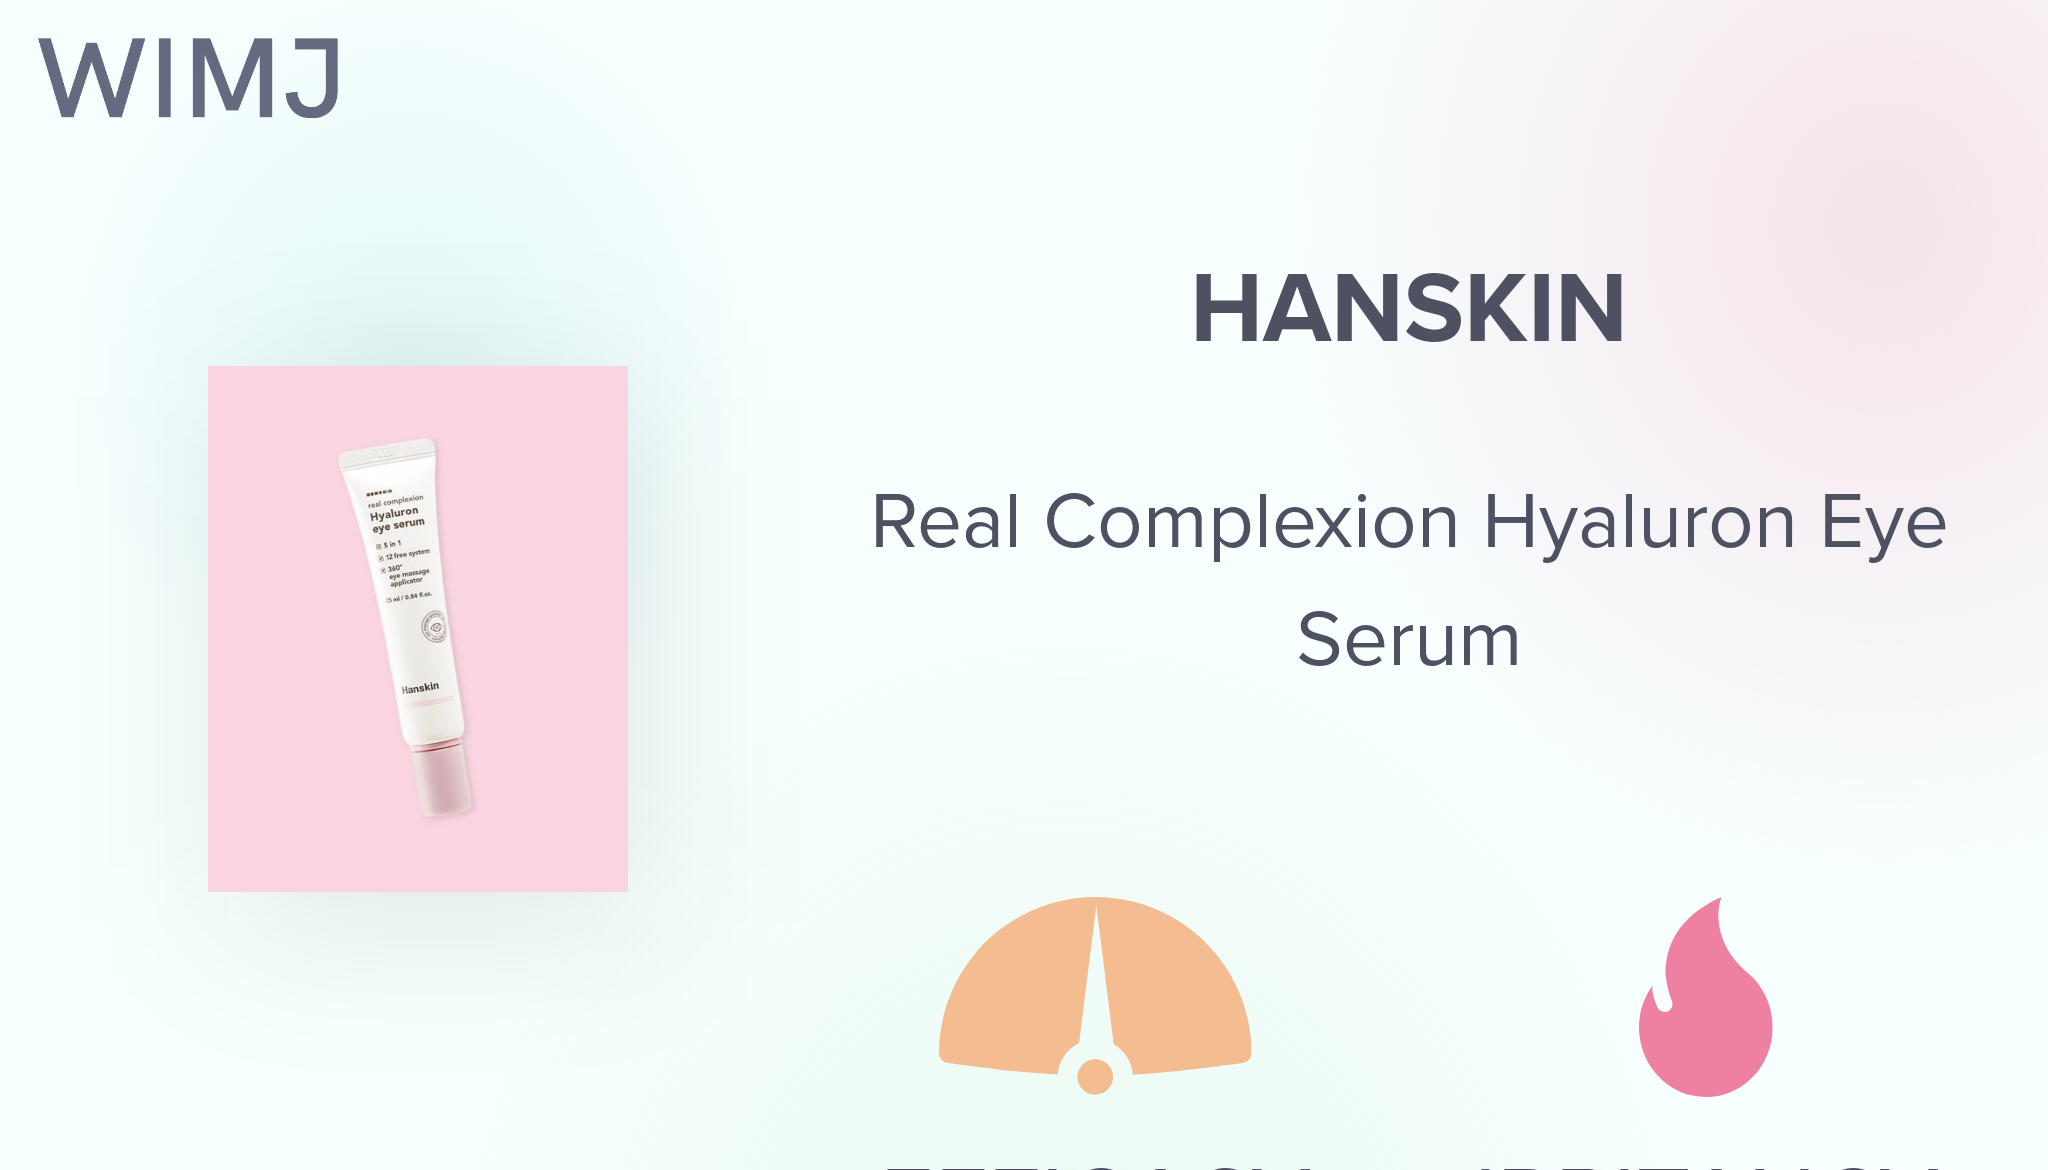 Review: Hanskin - Real Complexion Hyaluron Eye Serum - WIMJ